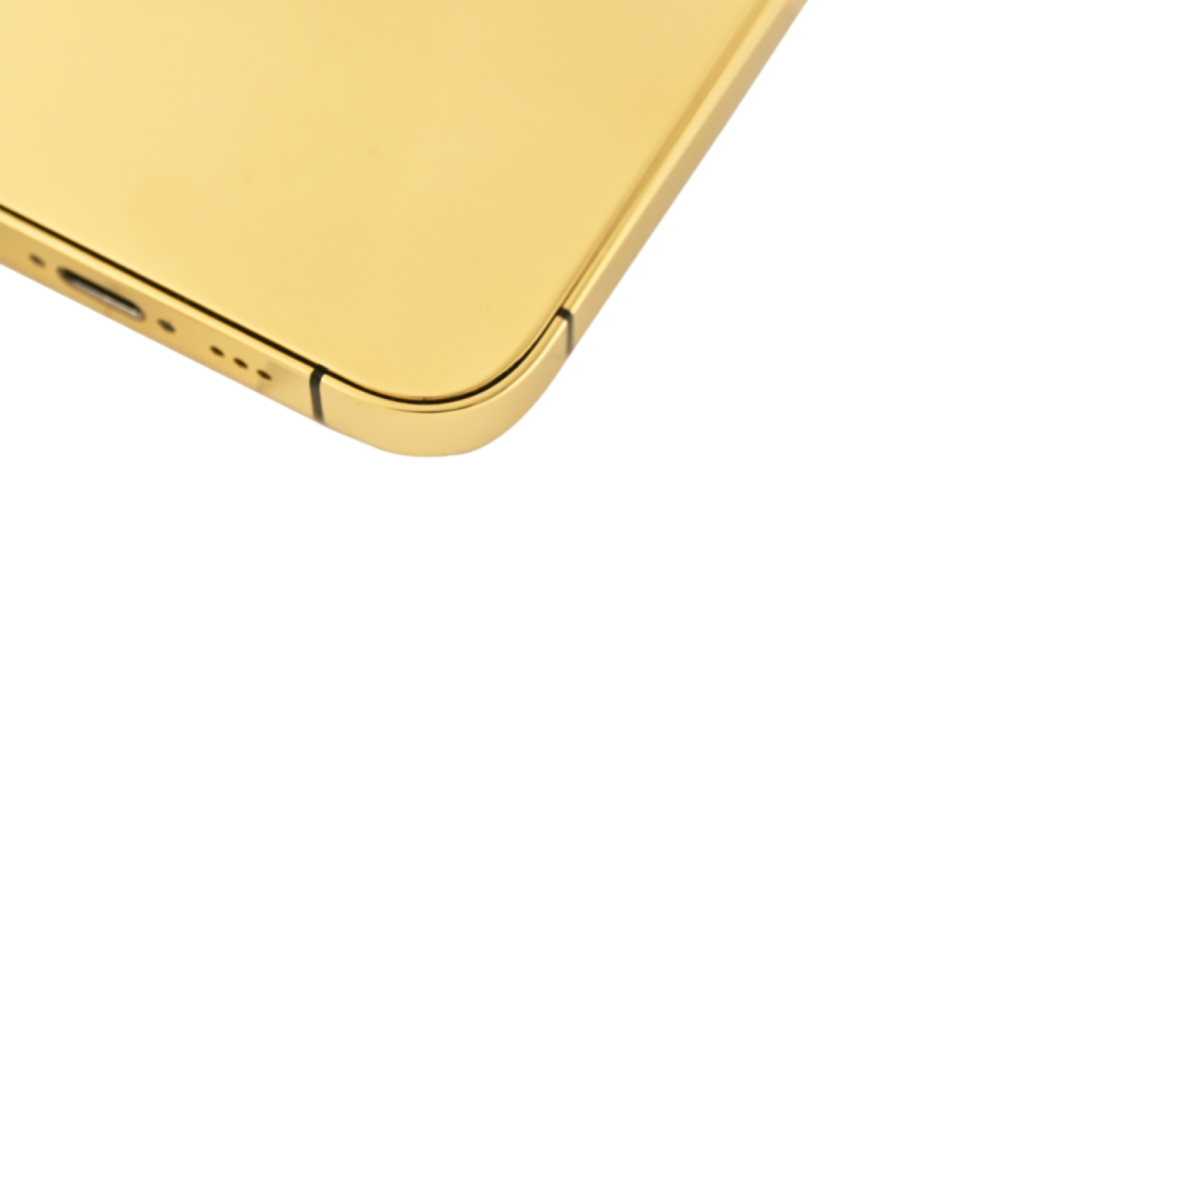 Caviar Luxury Customized iPhone 13 Pro Max 24K Full Gold Limited Edition 128GB